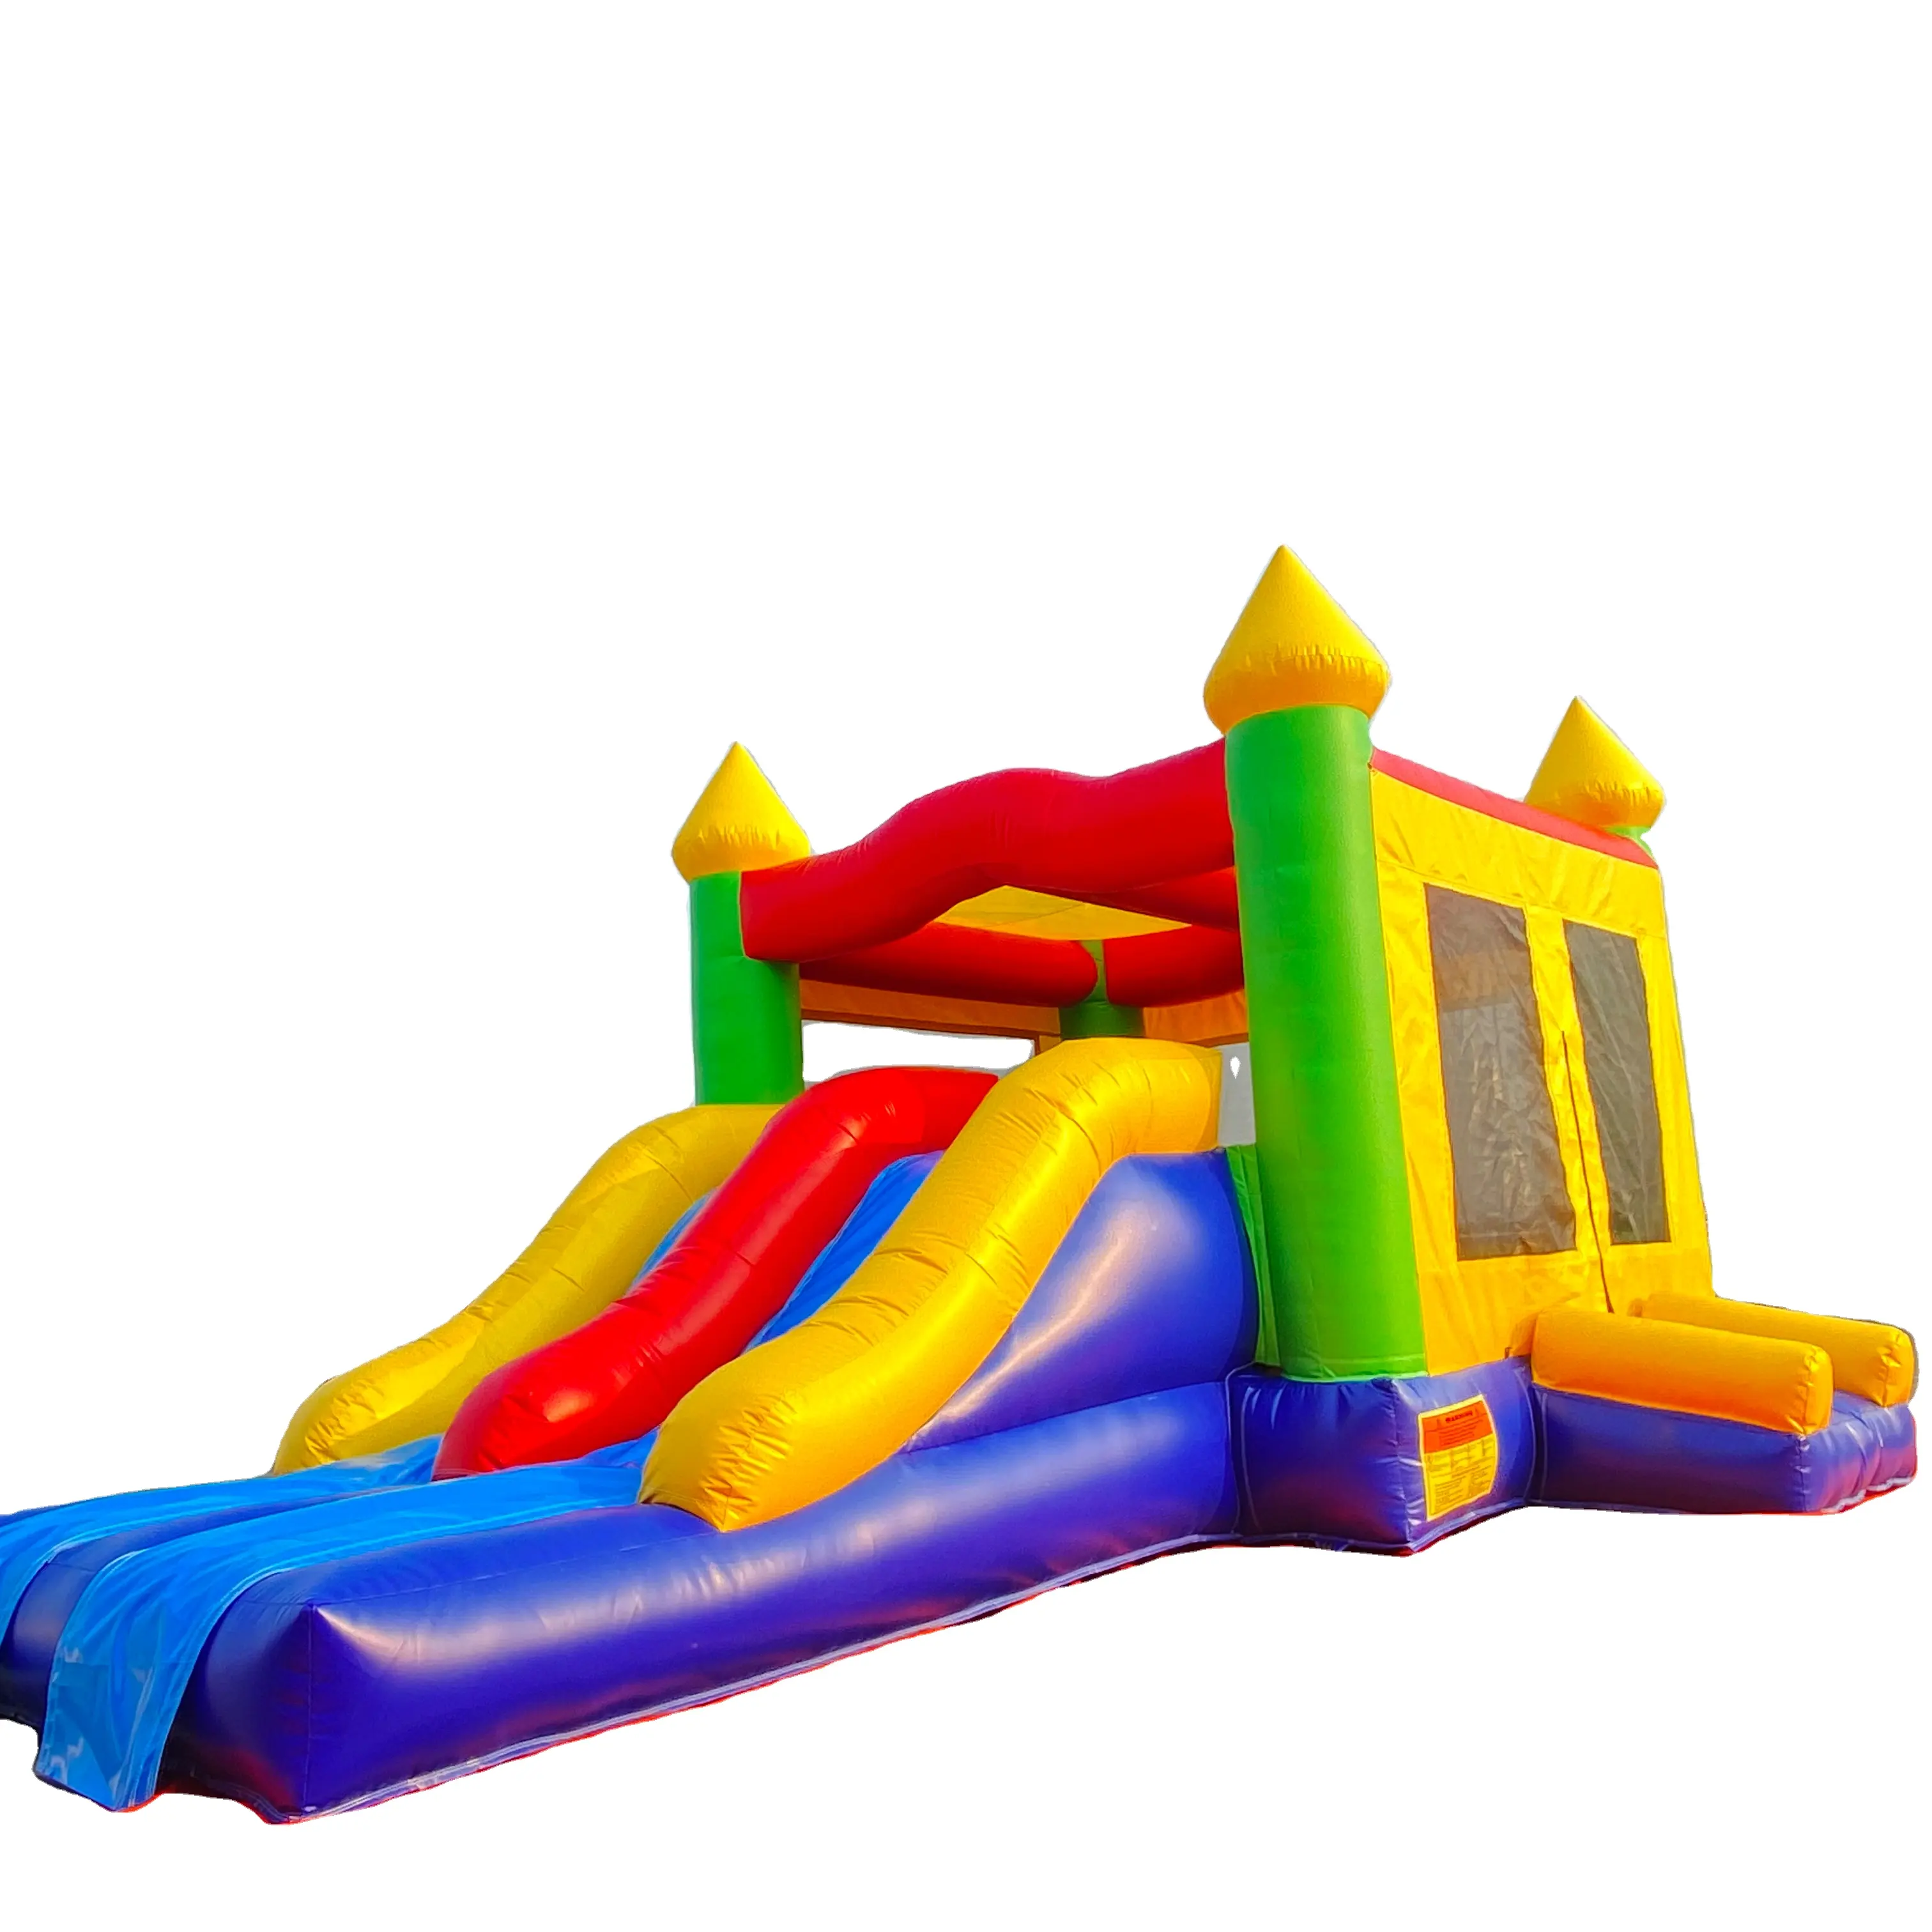 Hot sale inflatable bouncer with water slide outdoor slide and bouncer park toy for child and adult